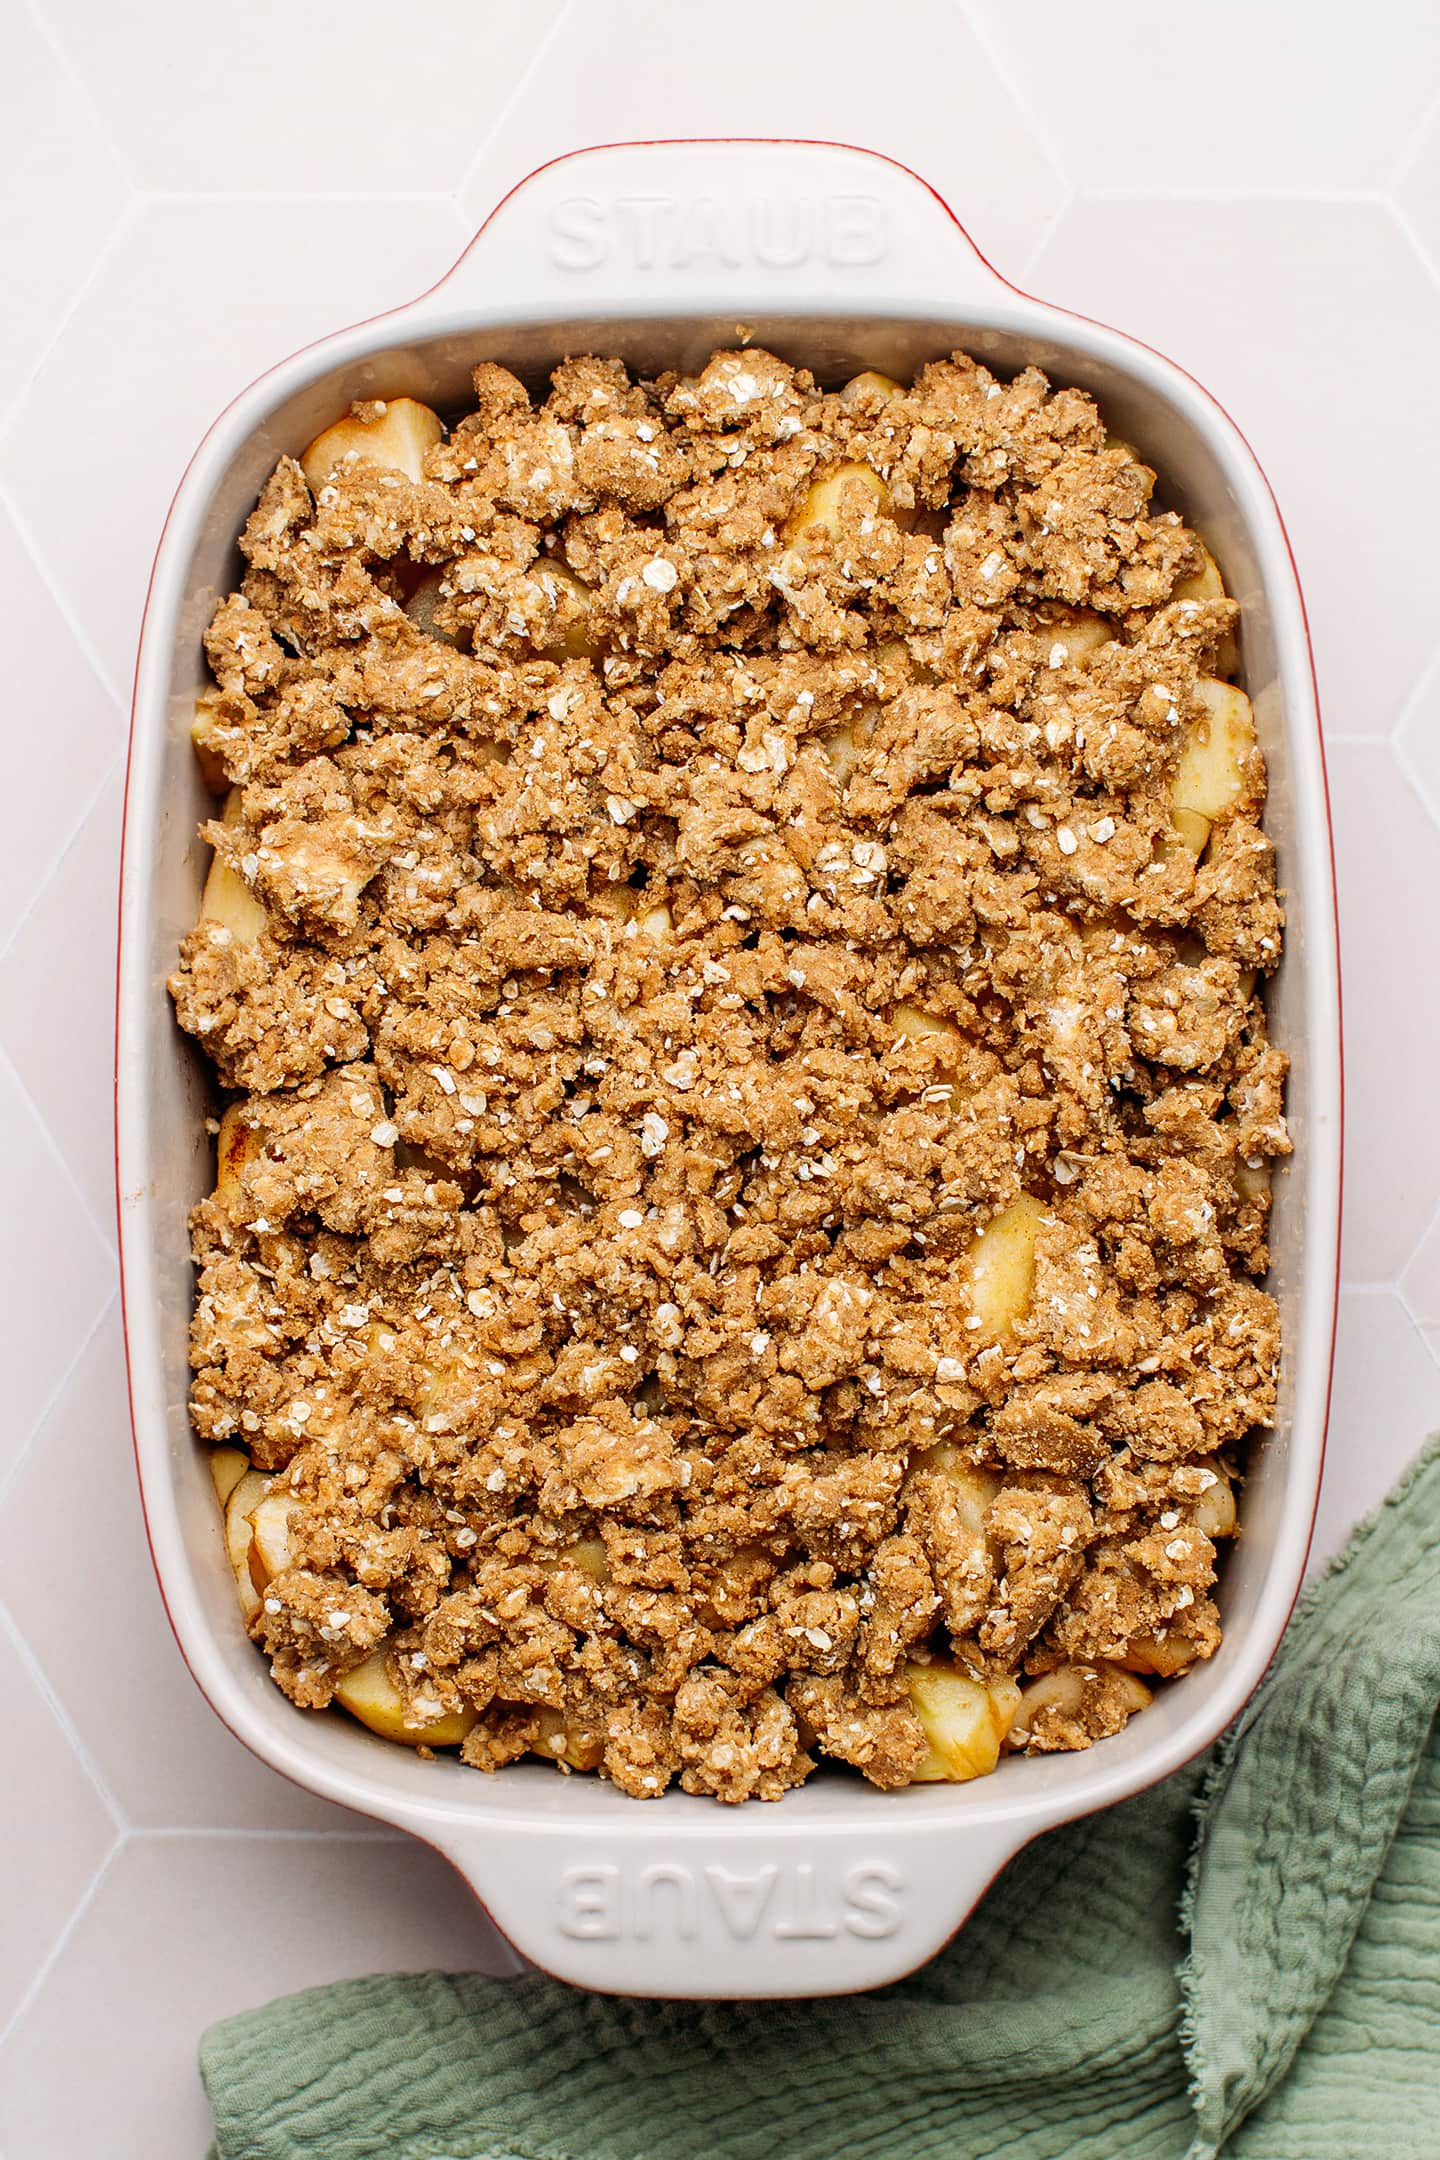 Diced apples topped with oat crumble.